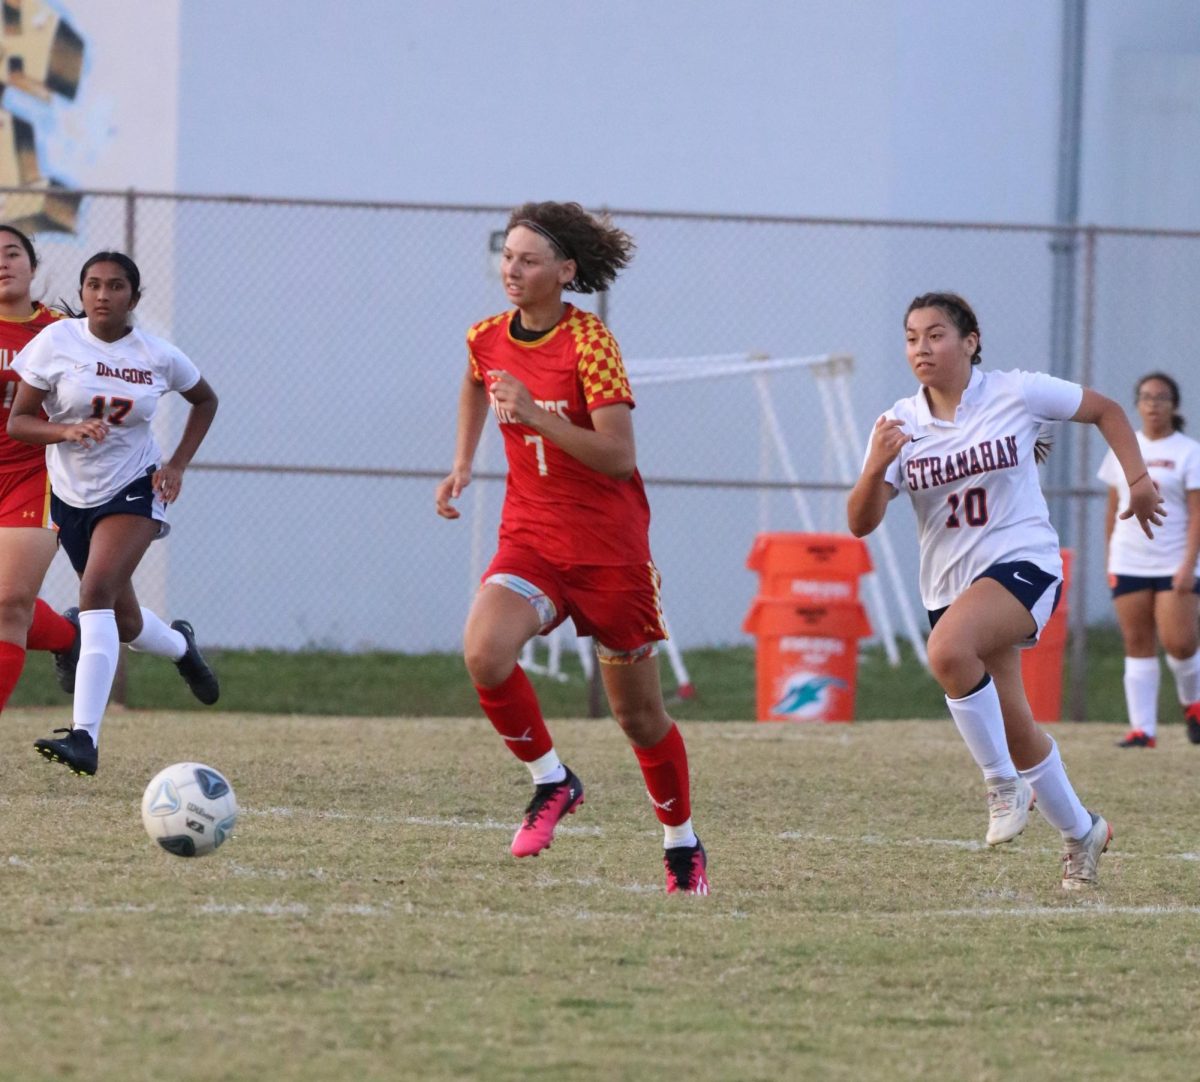 Isabel Capellen makes sure that no one other than her is going to get to that ball before her by sprinting full speed down the center of the field and beating out all of Stranahans defenders.